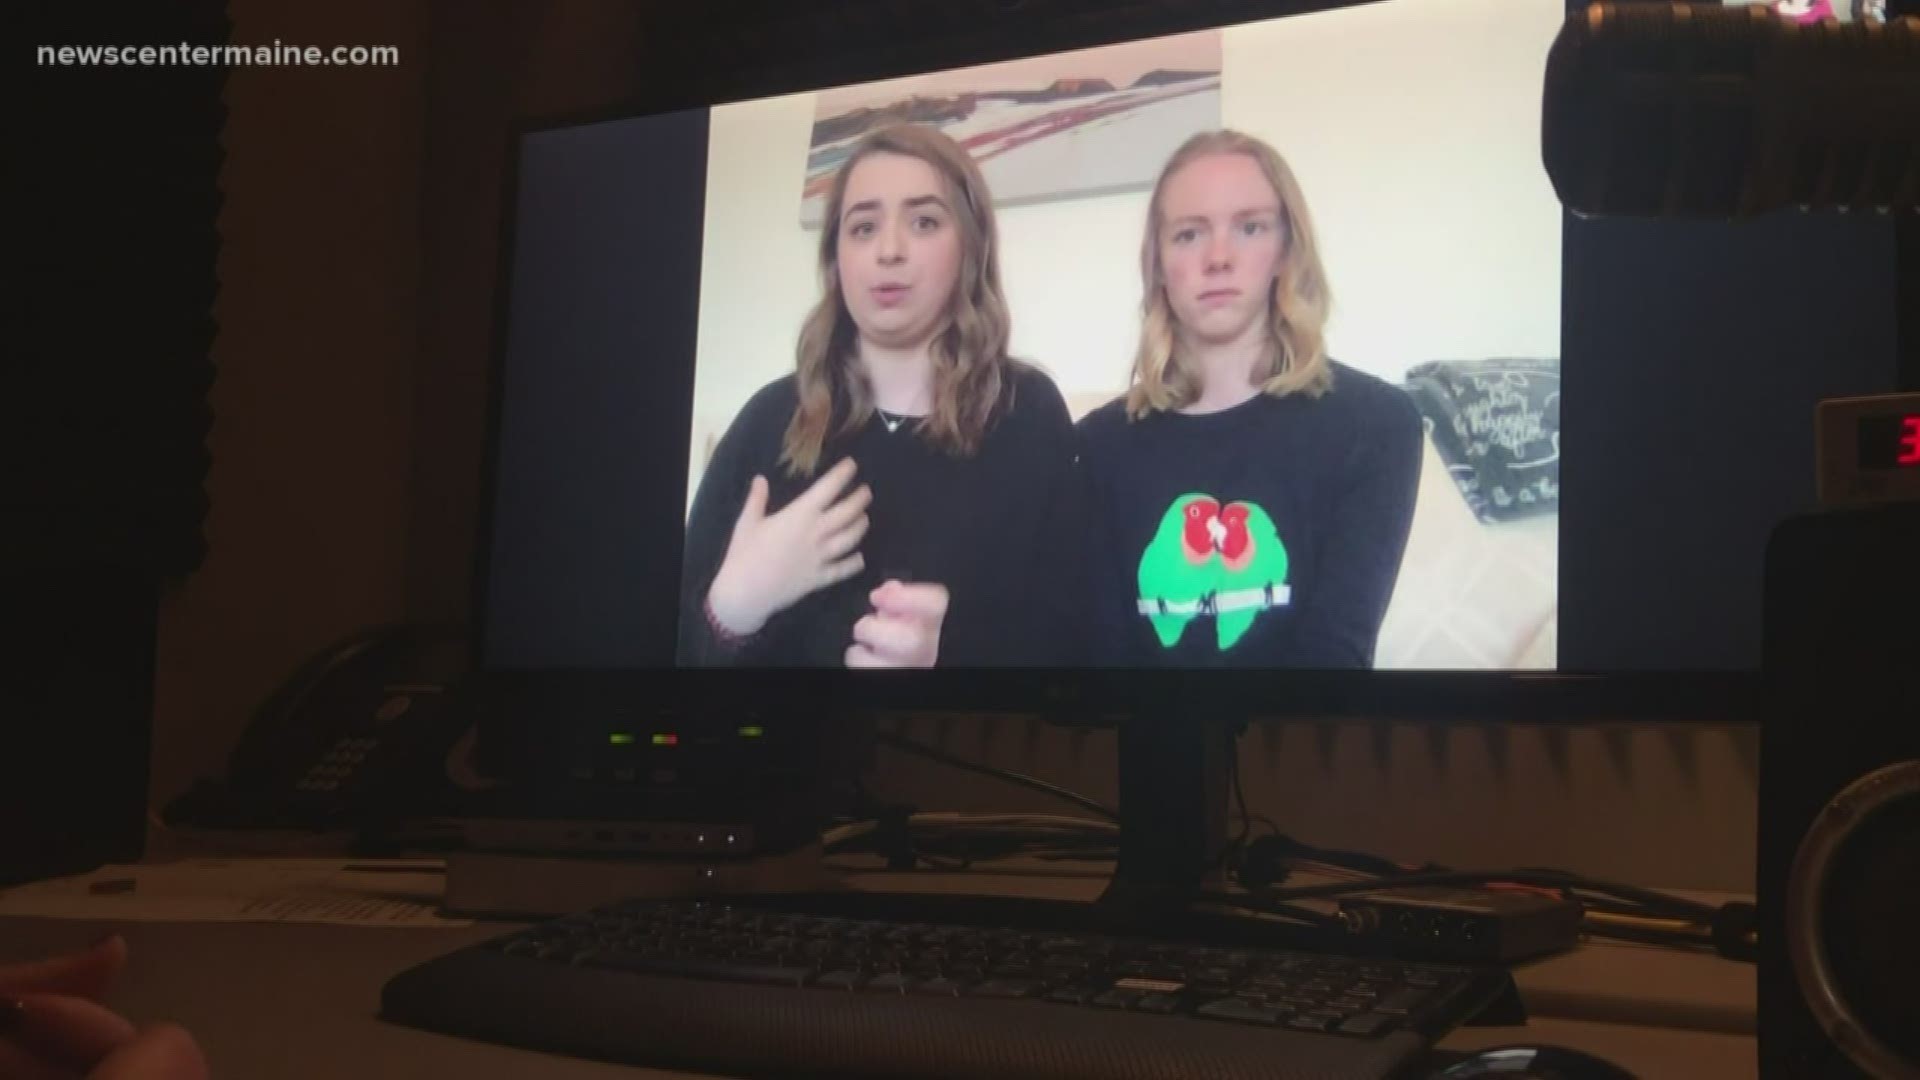 NEWS CENTER Maine exclusively sat down with two young women in Southern Maine who are in quarantine due to COVID-19.